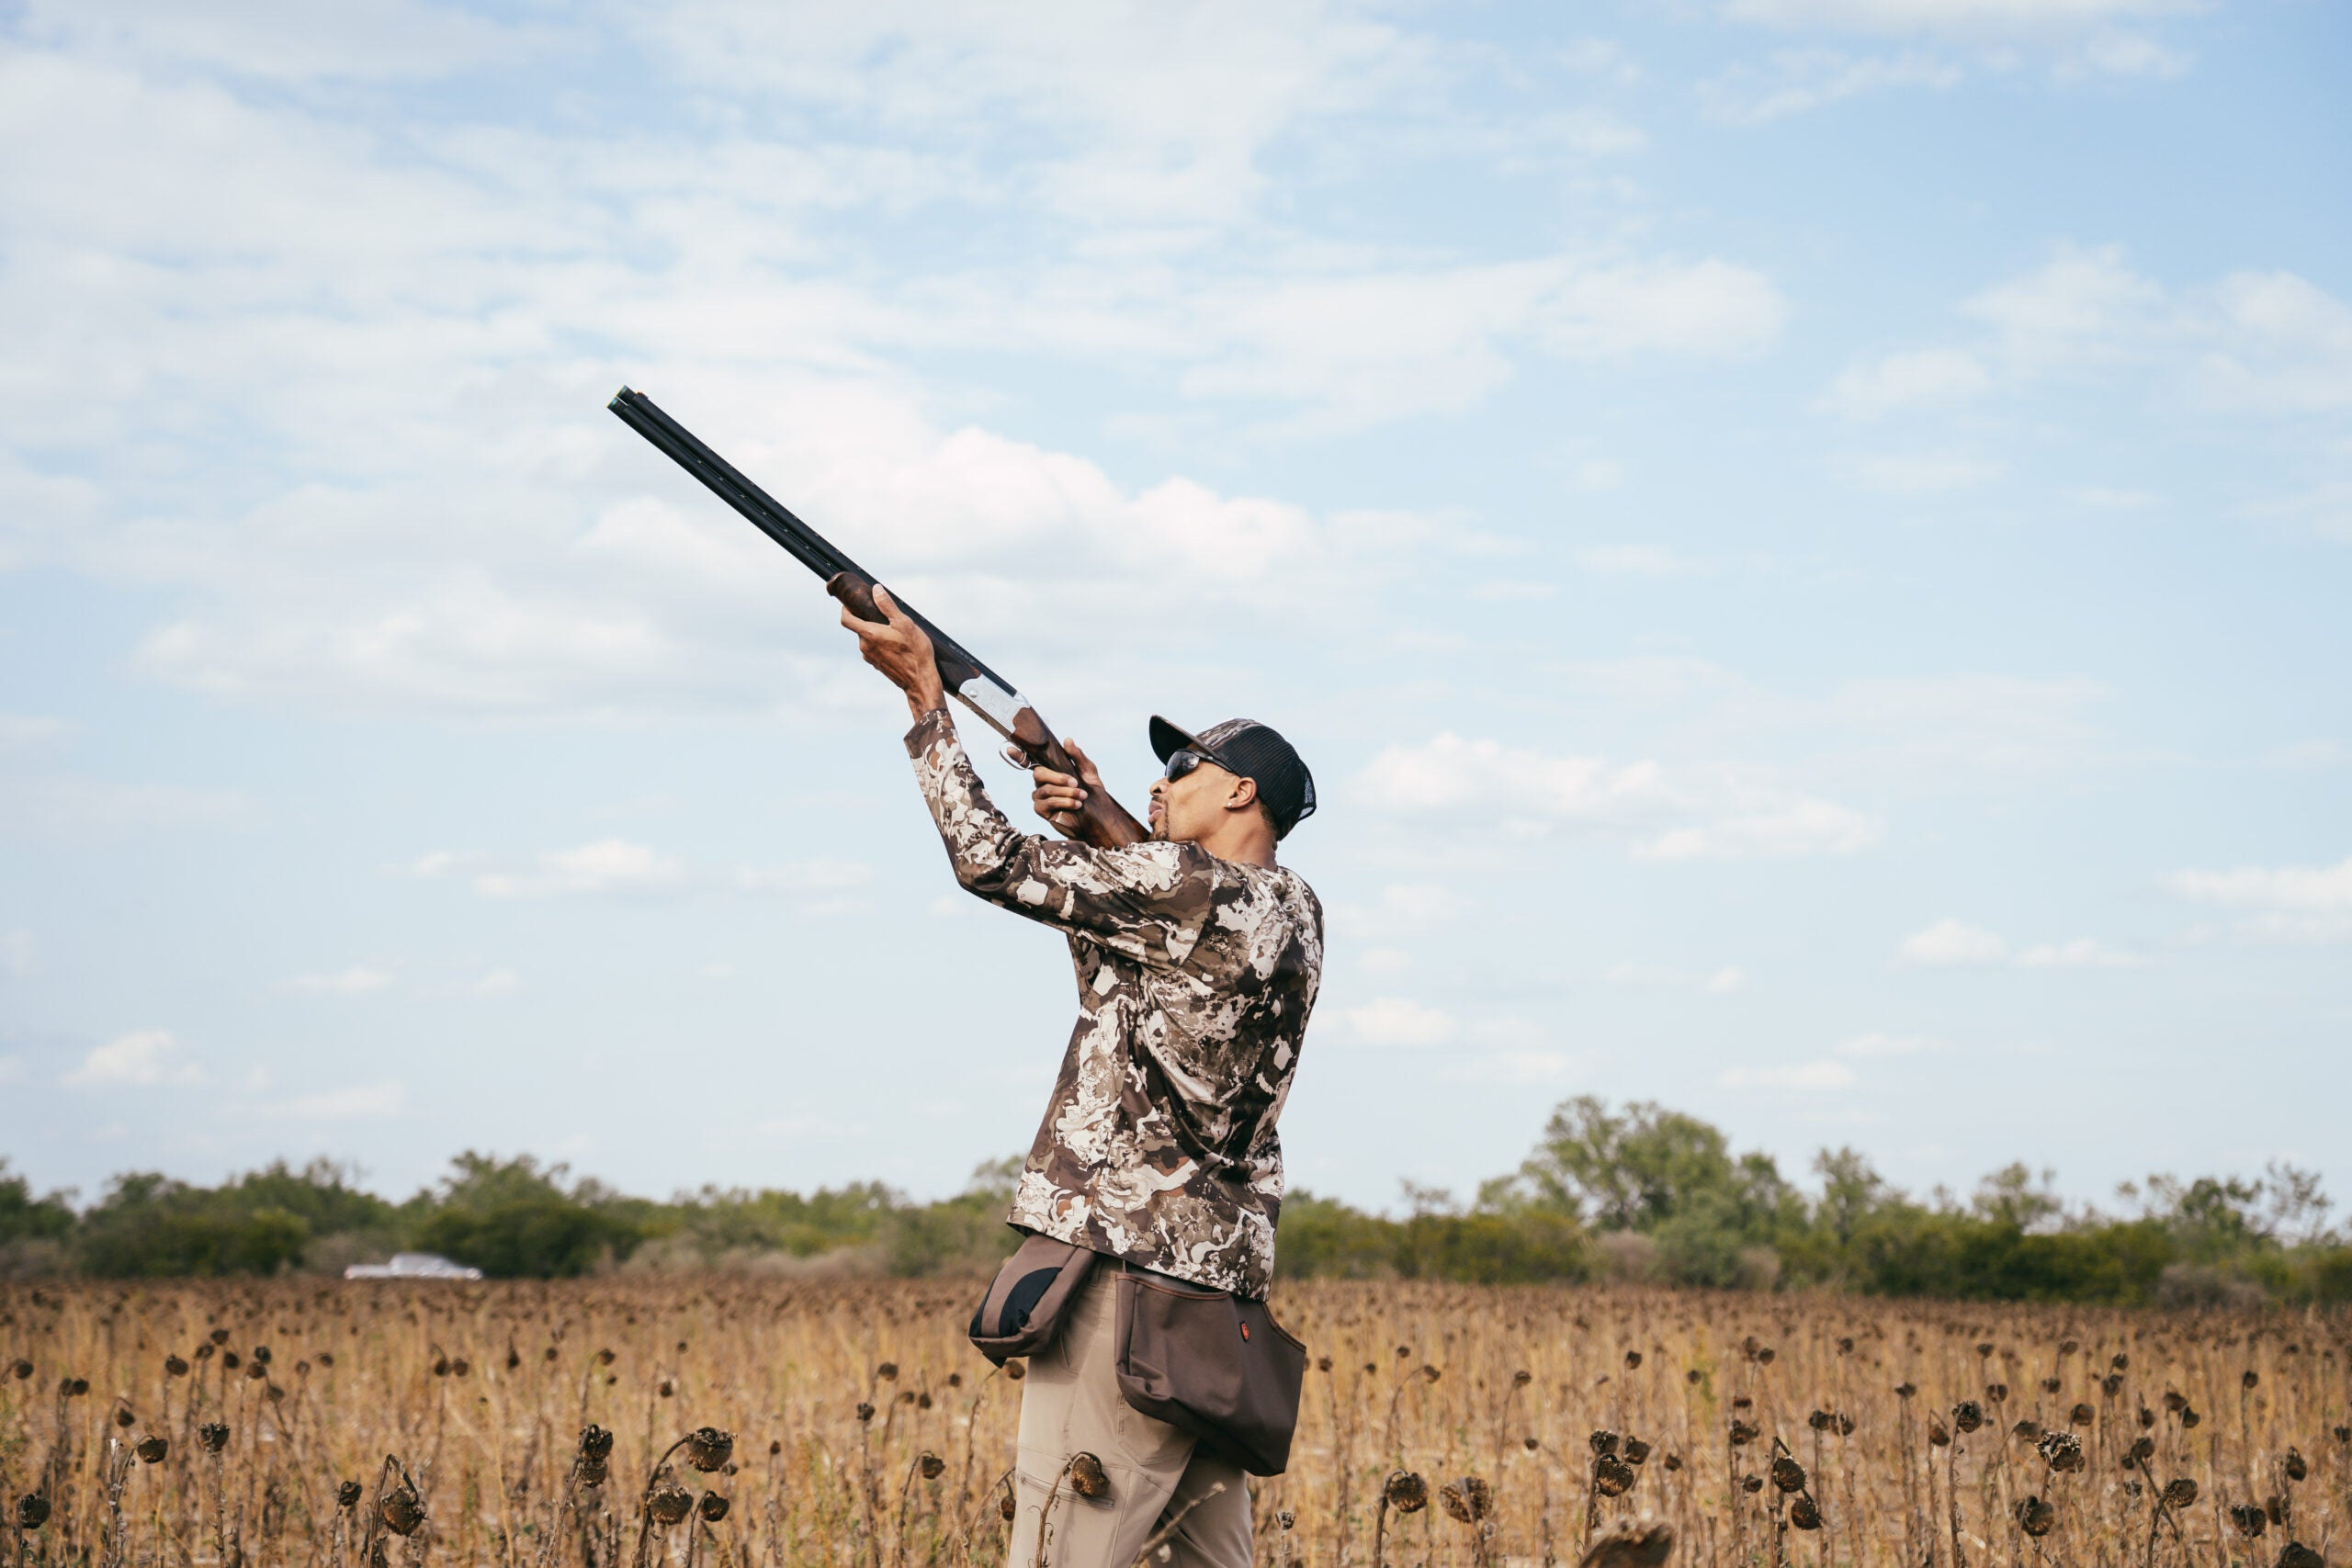 A good mount will take you far in on dove shoots.